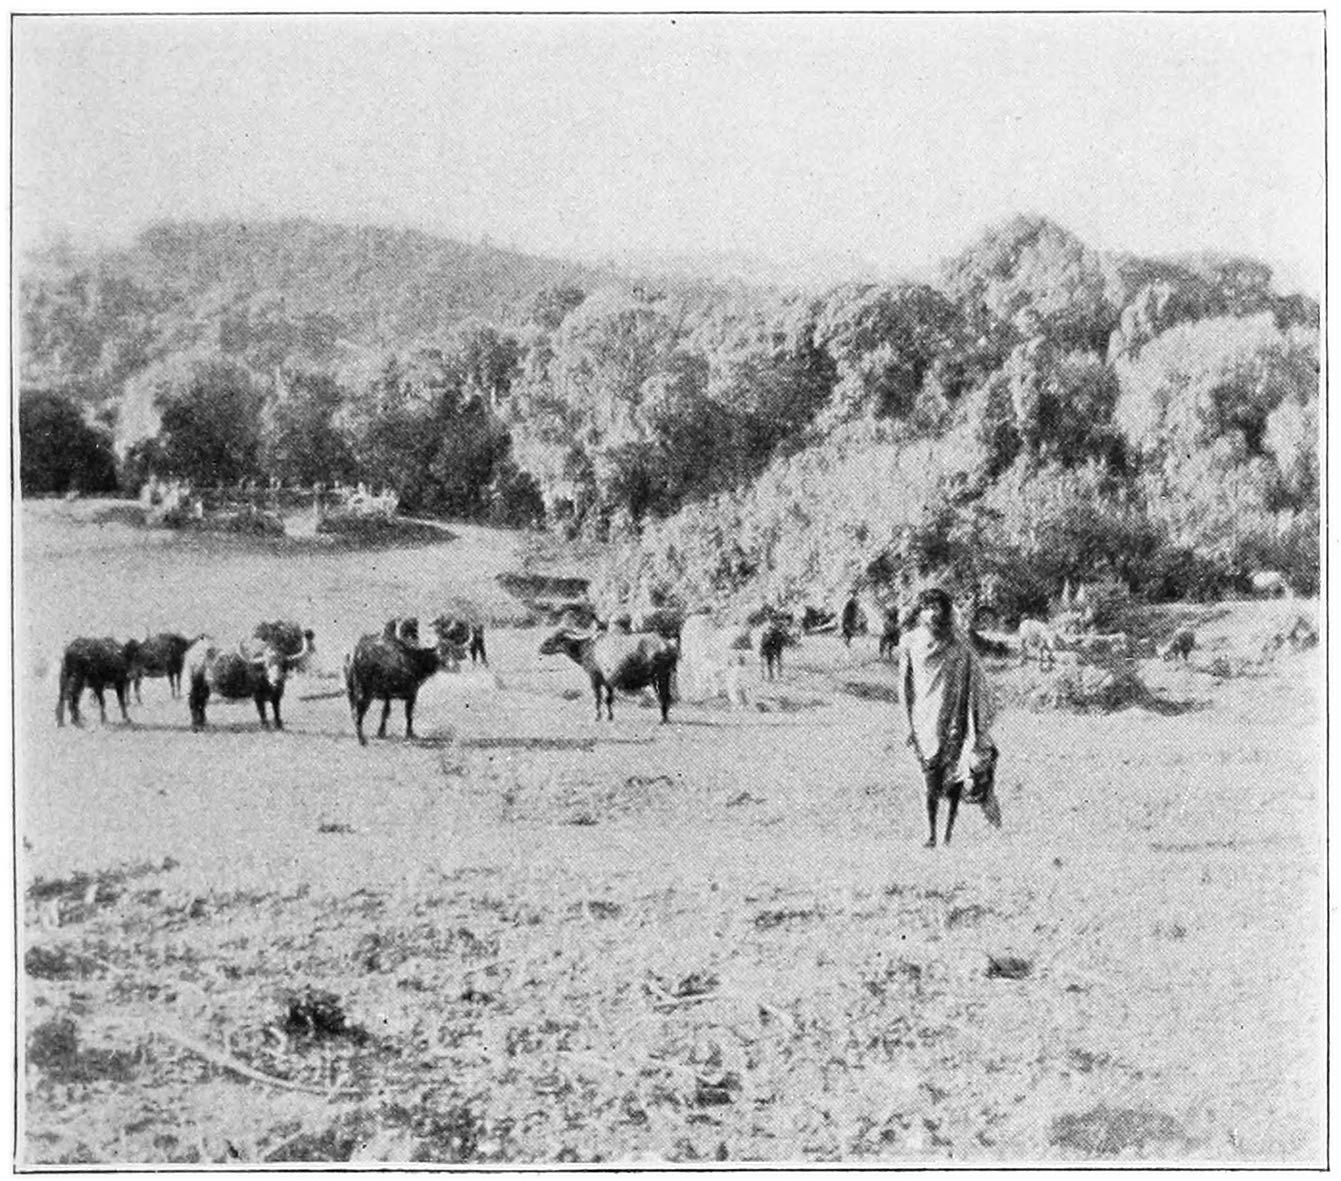 FIG. 16.—THE MORNING MILKING AT THE VILLAGE OF MOLKUSH. IN THE BACKGROUND IS A MODERN ‘TU’ MADE OF WOODEN PALINGS.